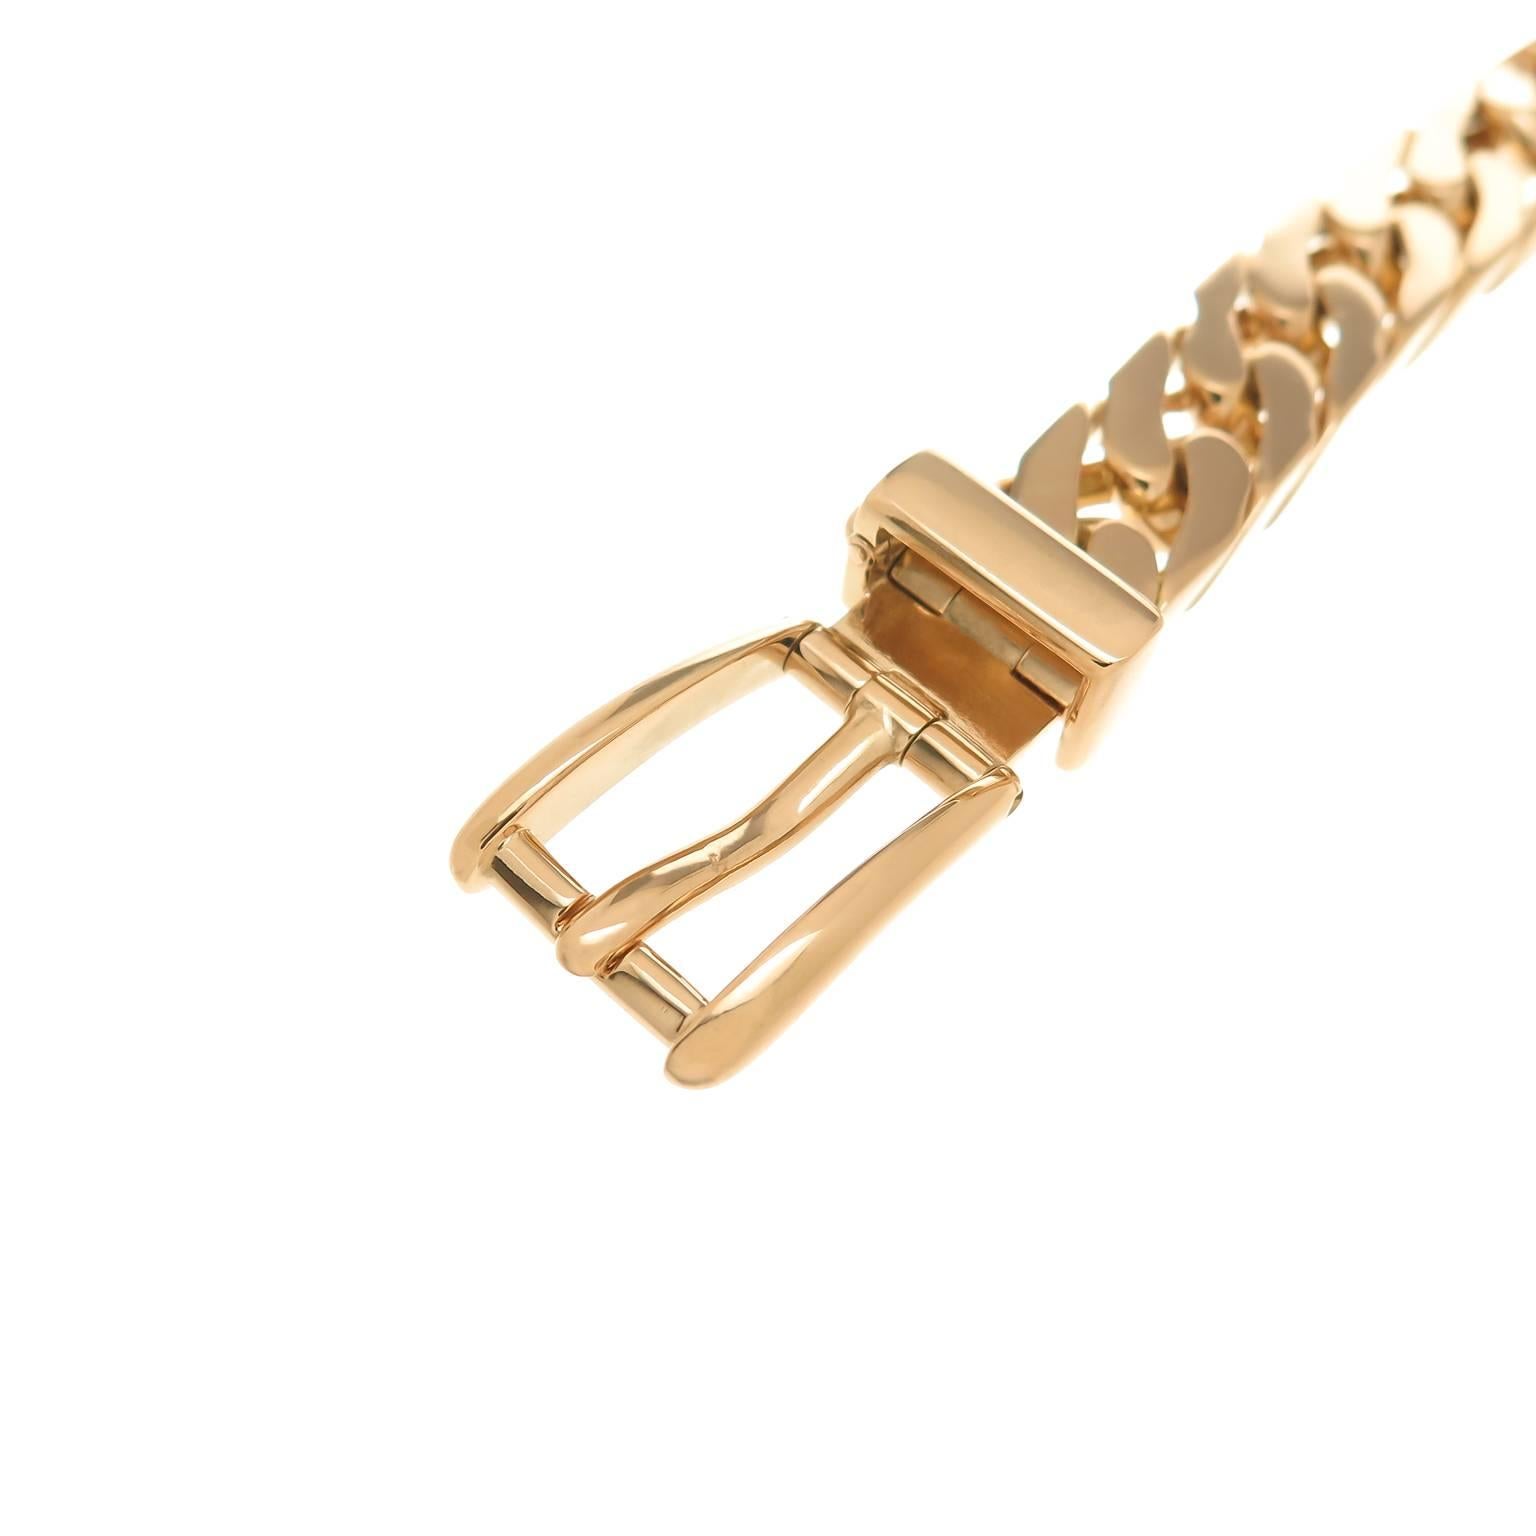 Circa 1970s Gucci 18k Yellow Gold solid Link Bracelet, with adjustable buckle style closure. Measuring 9.5 inches in length, 1/2 inch wide and weighing 110.8 Grams.